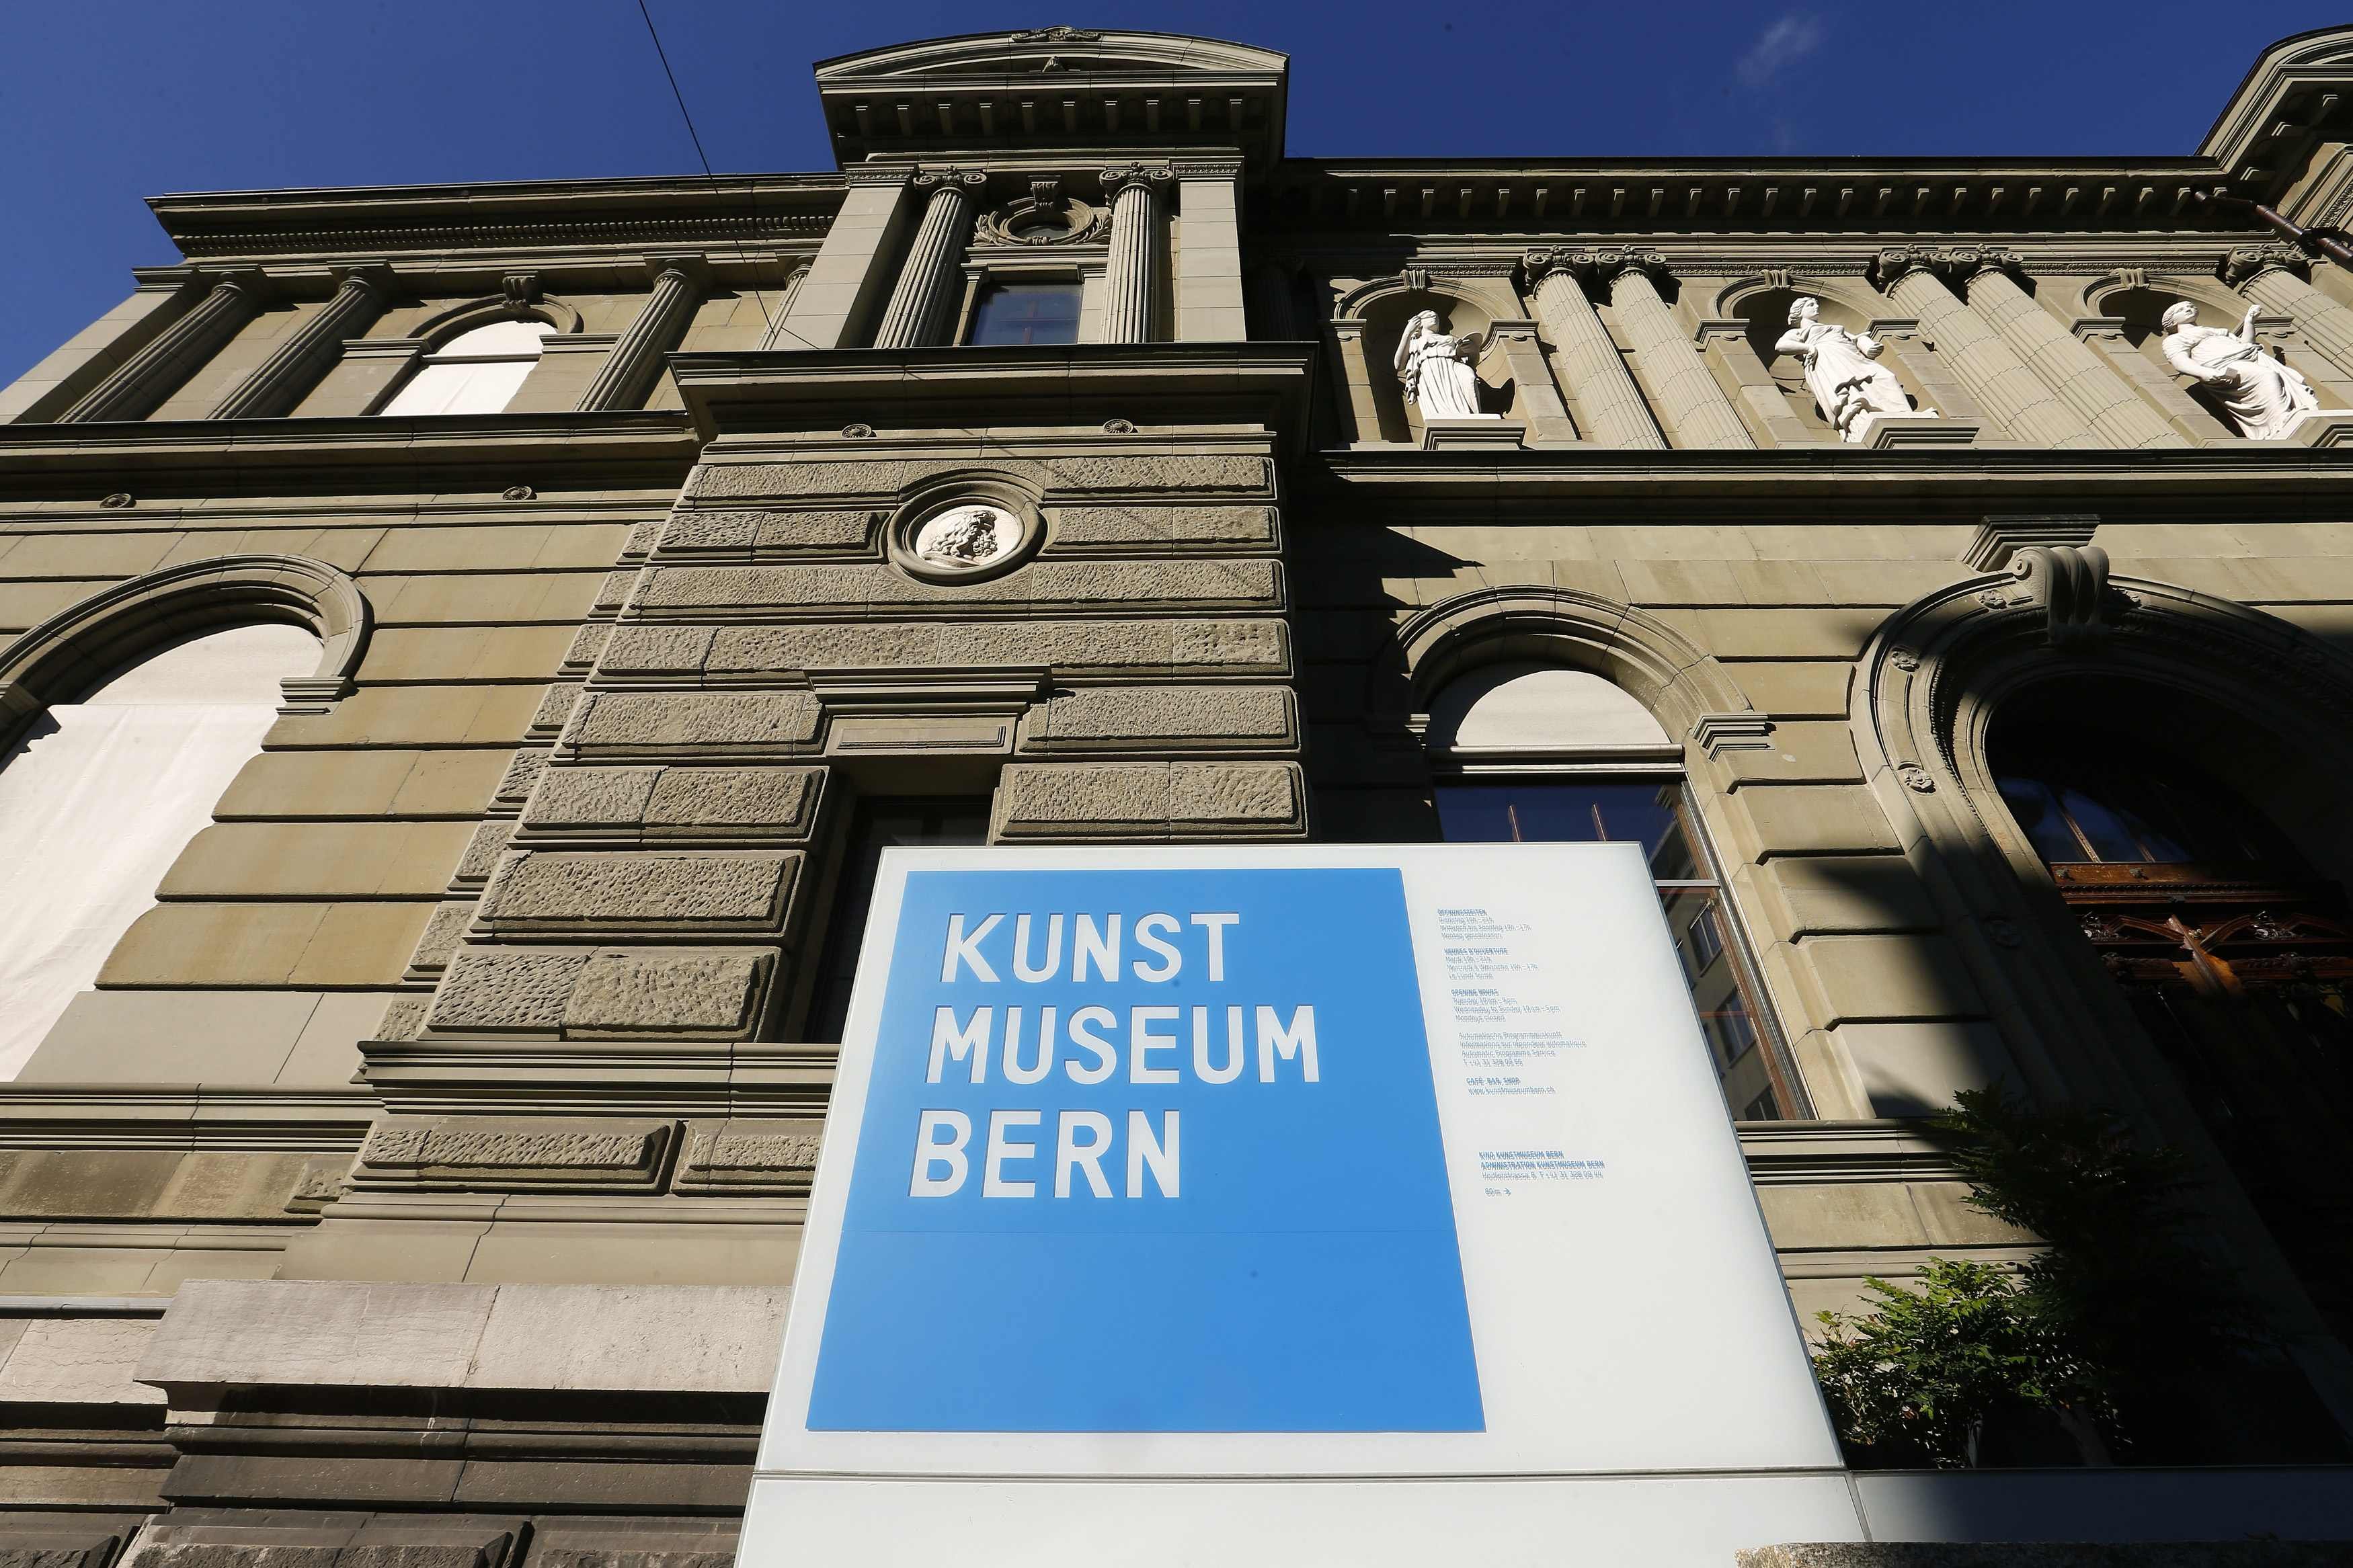 The facade of the Kunstmuseum Bern art museum is seen in the Swiss capital of Bern on May 7, 2014. (Arnd Wiegmann—Reuters)